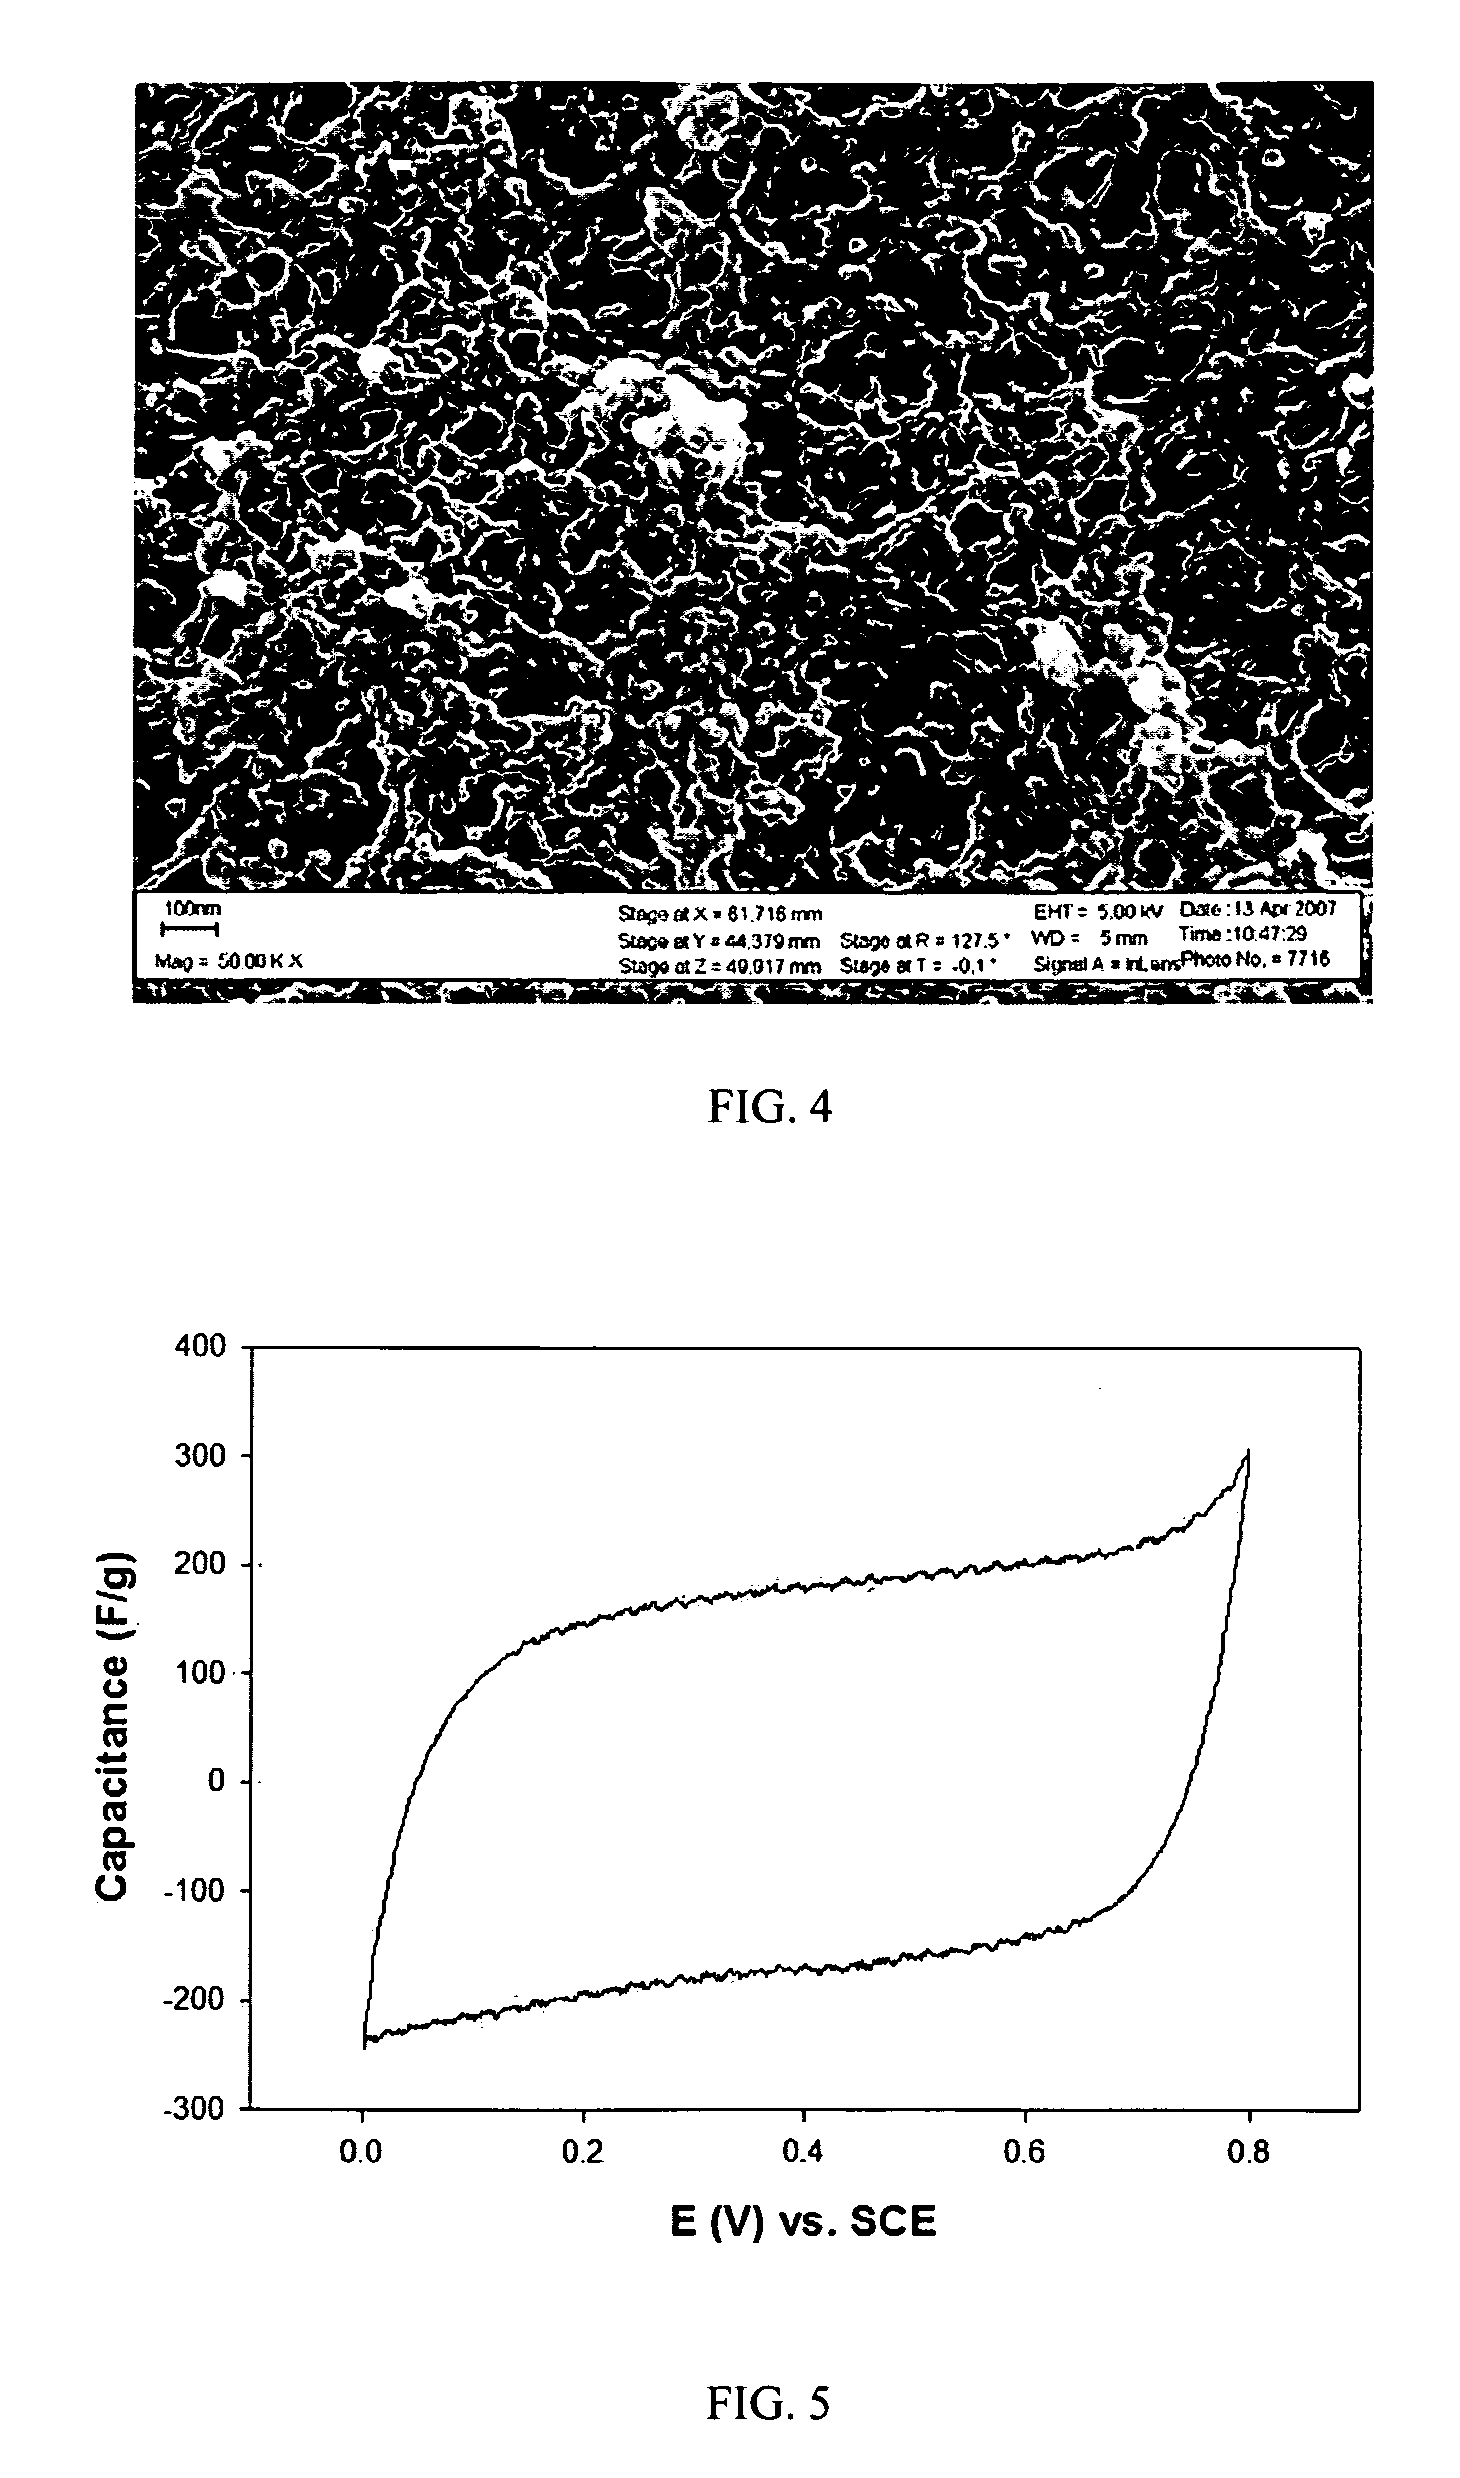 Composite electrode comprising a carbon structure coated with a thin film of mixed metal oxides for electrochemical energy storage